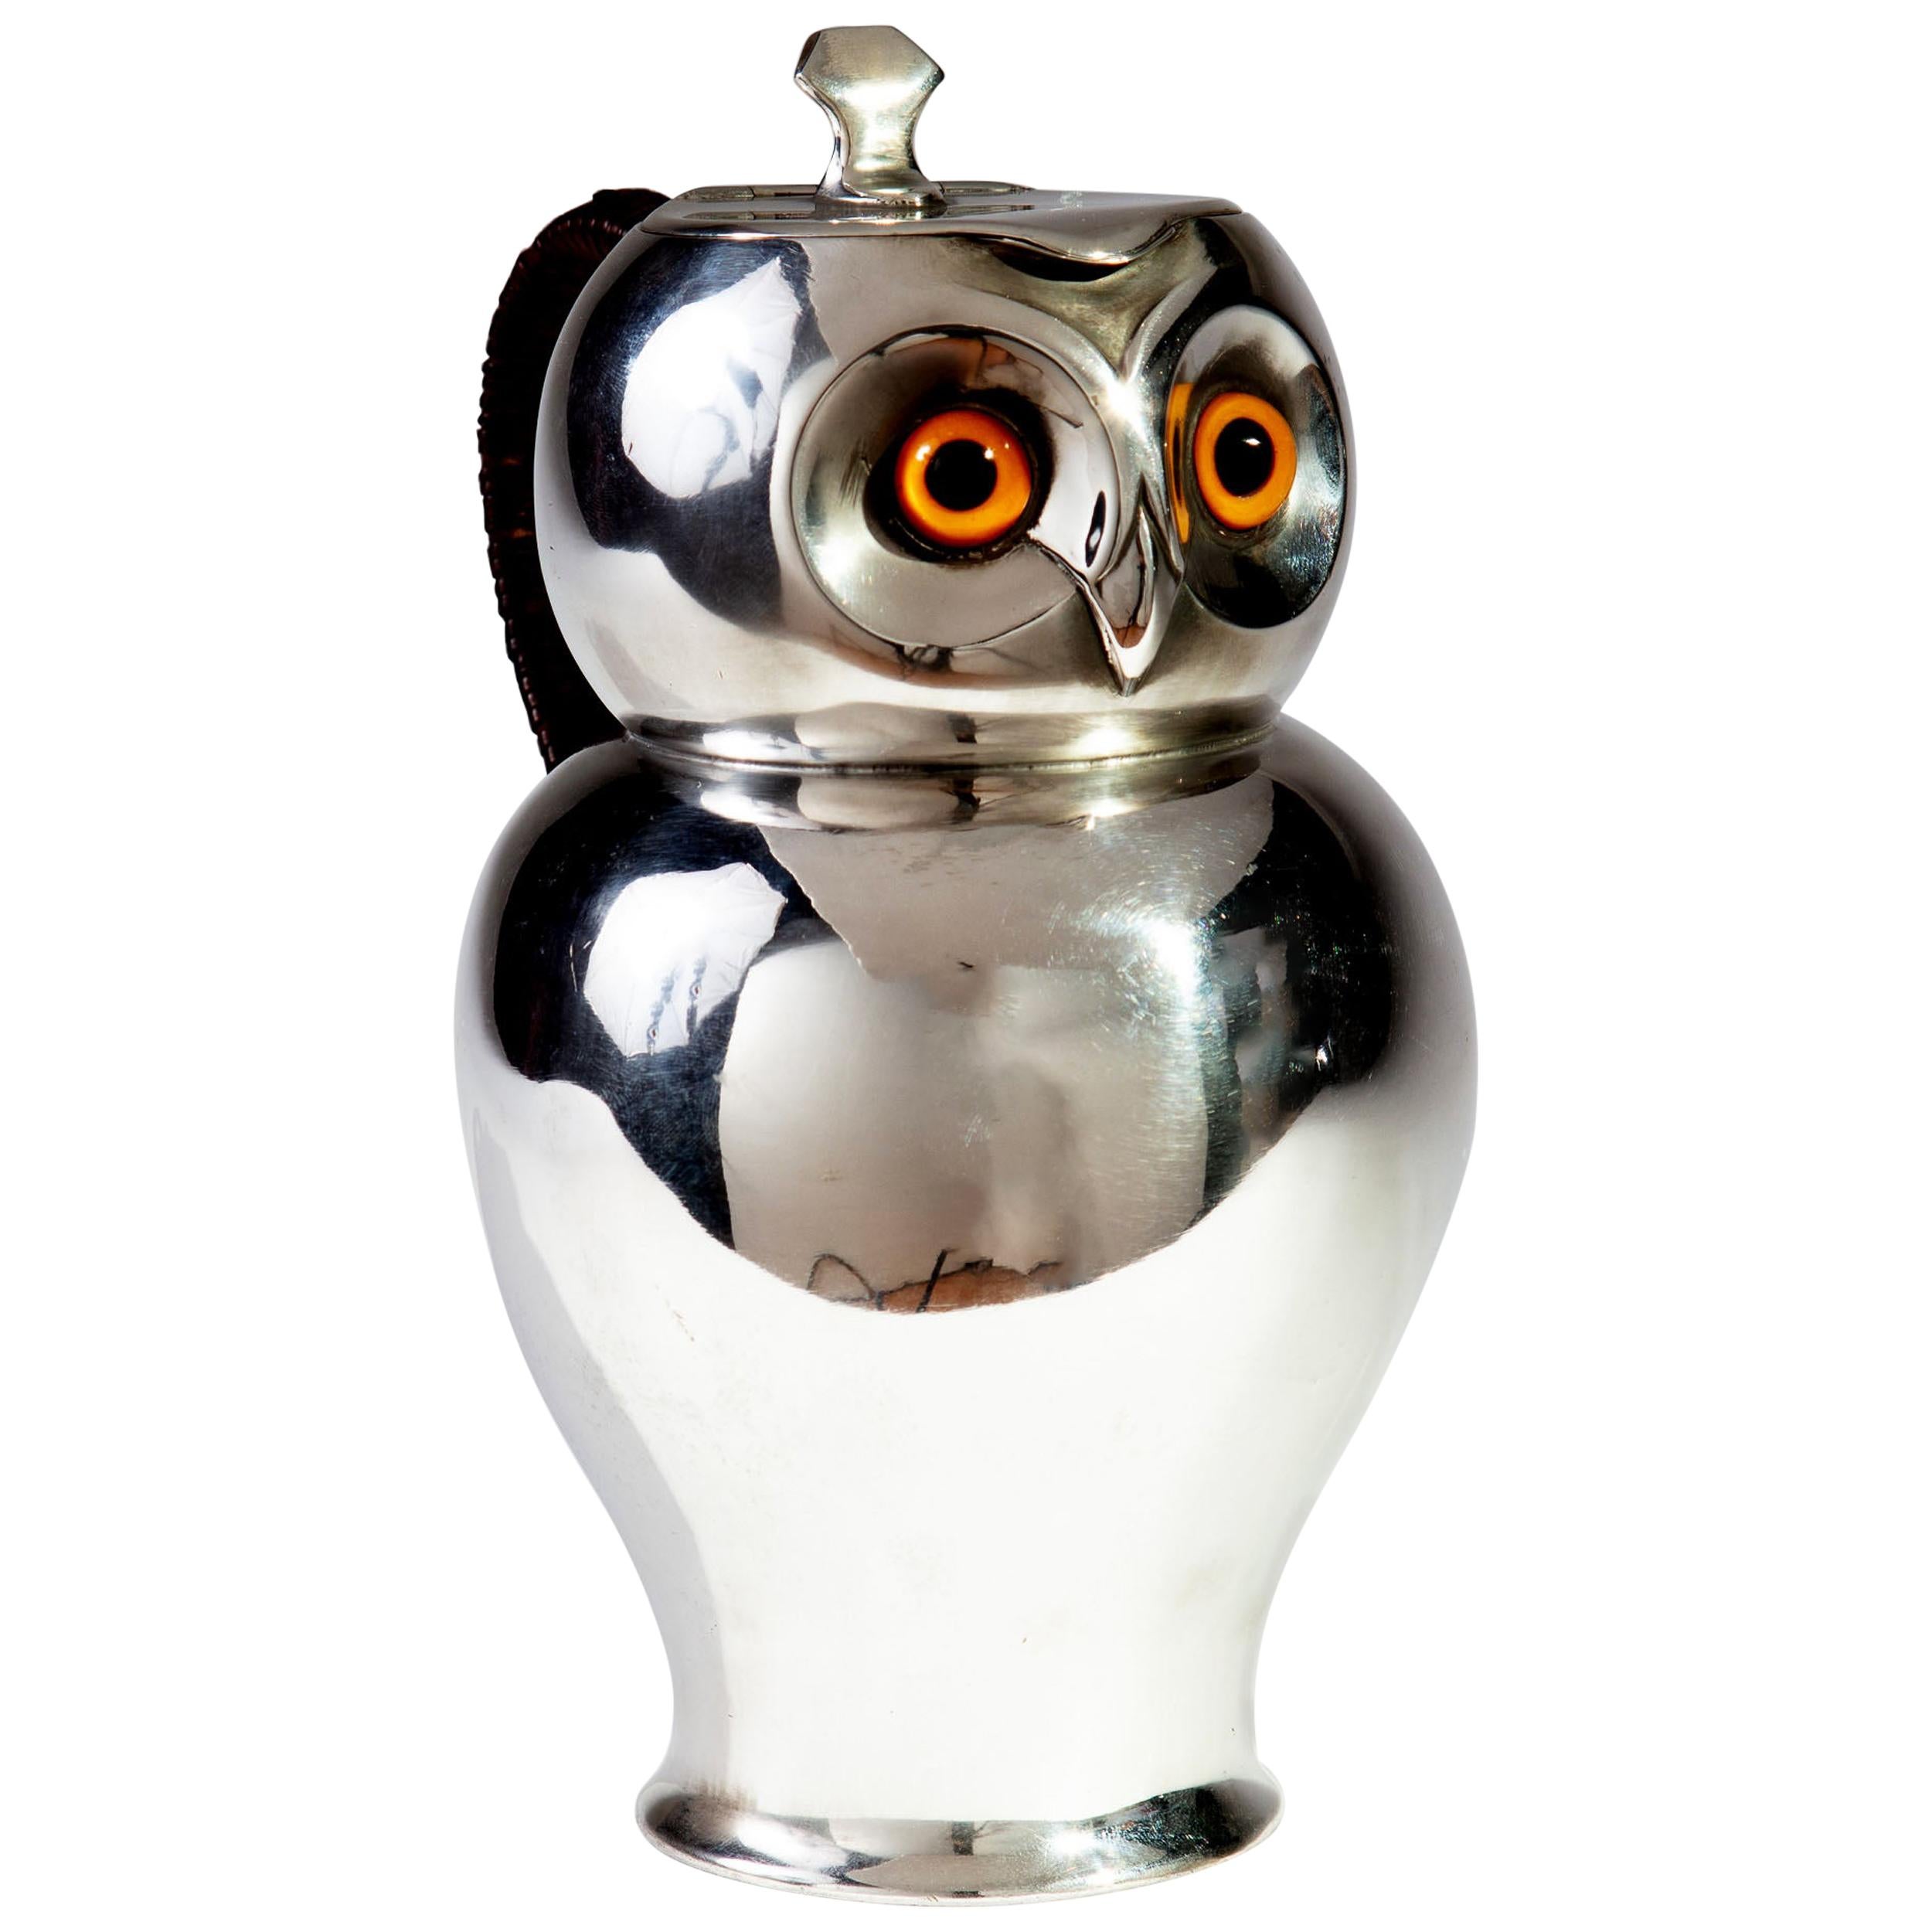 19th Century Silver Hot Chocolate Pot in the Form of an Owl, HJ LINTON, Paris